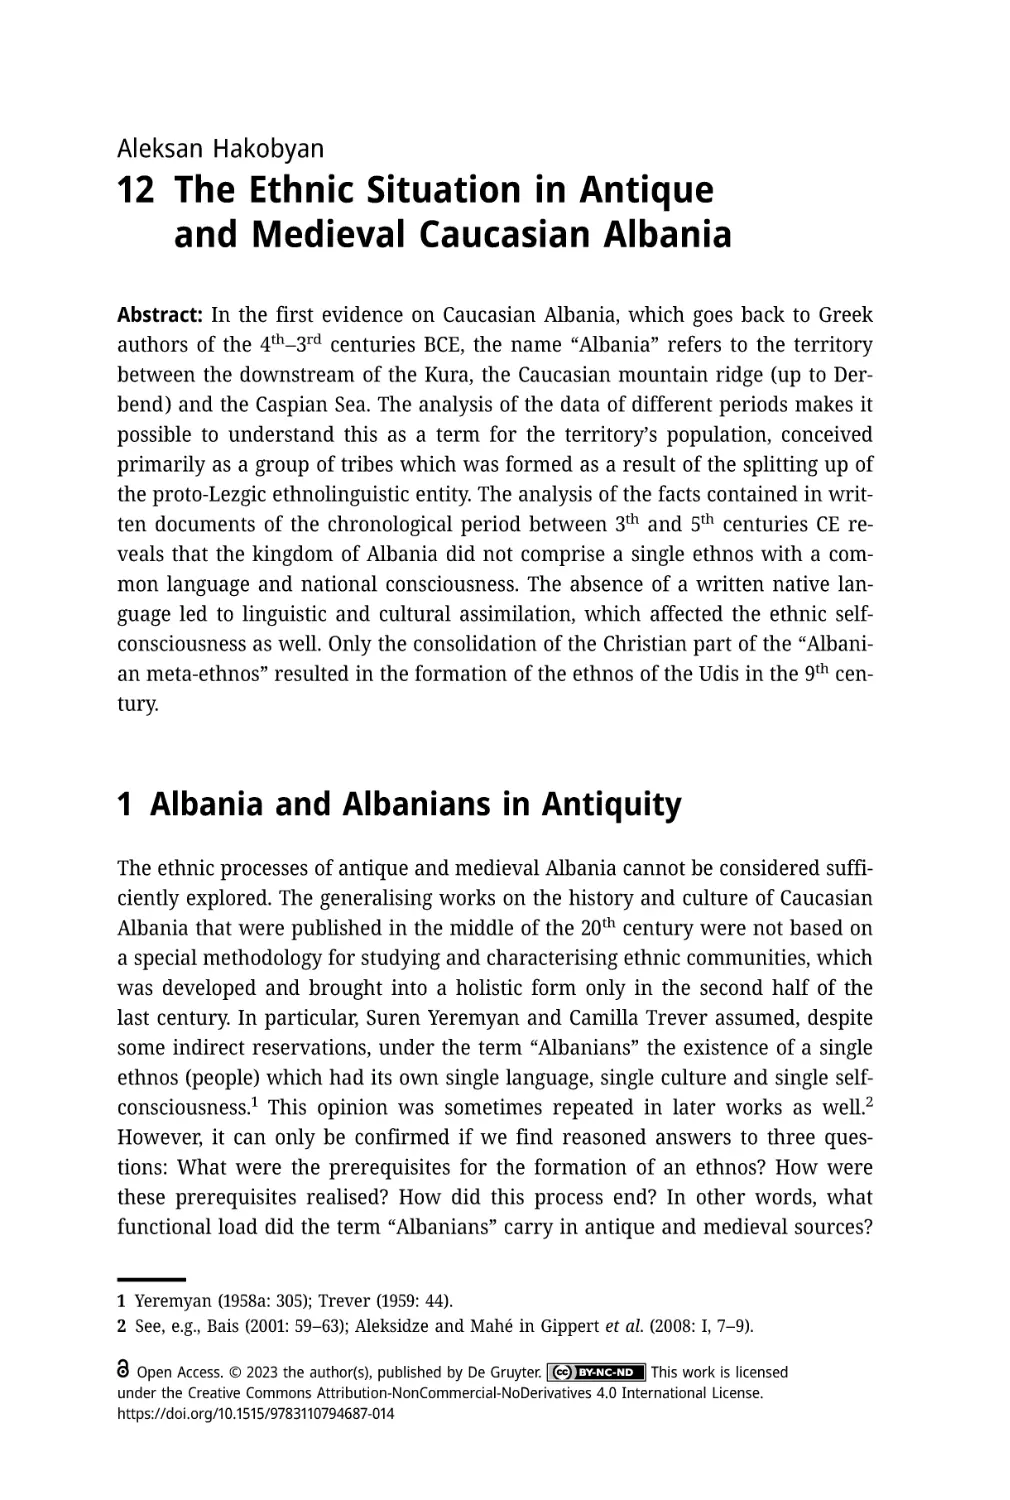 V Ethnic, Religious and Social Issues
12 The Ethnic Situation in Antique and Medieval Caucasian Albania